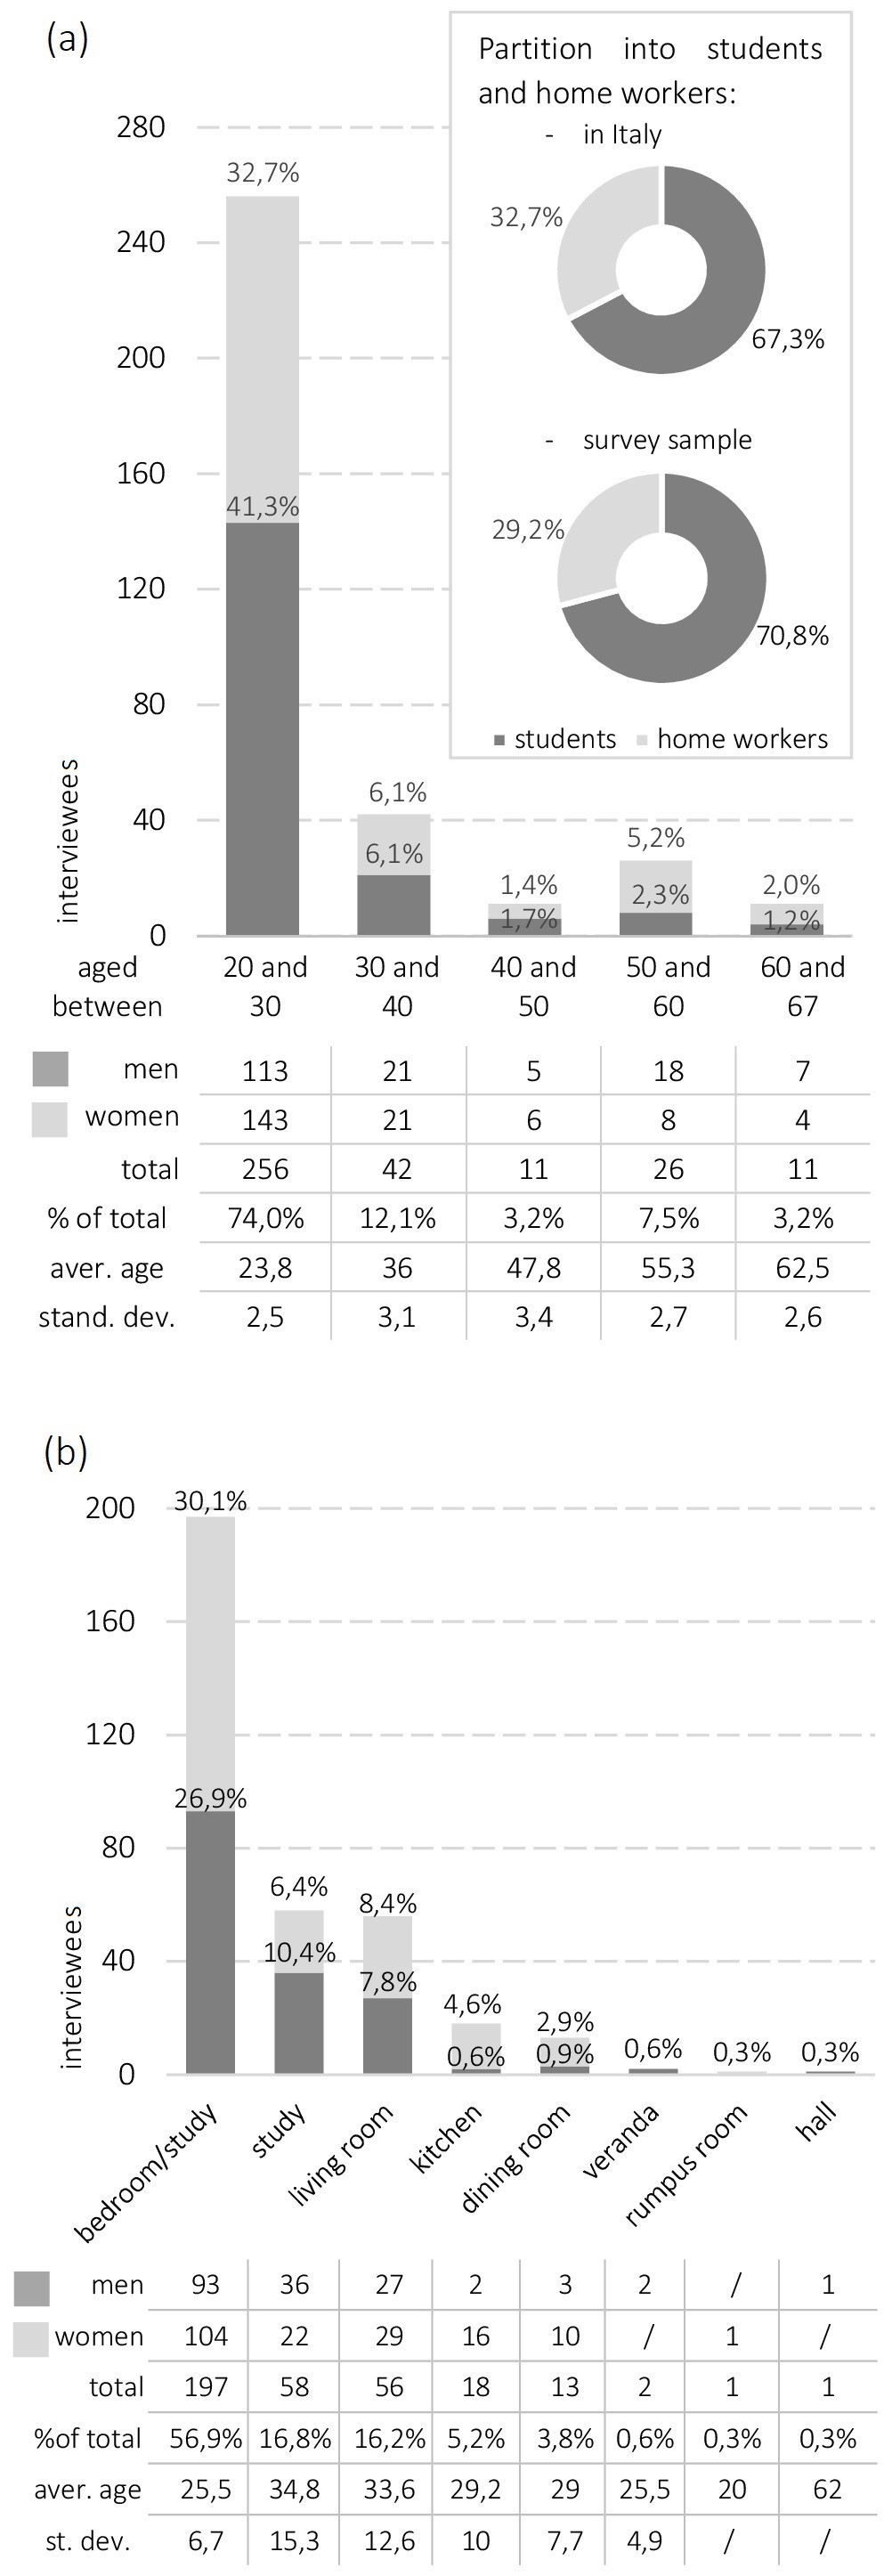 Survey sample distribution according to the age and sex (a), and the room used for home working (b); percentages refer to the total number of interviewees (346).